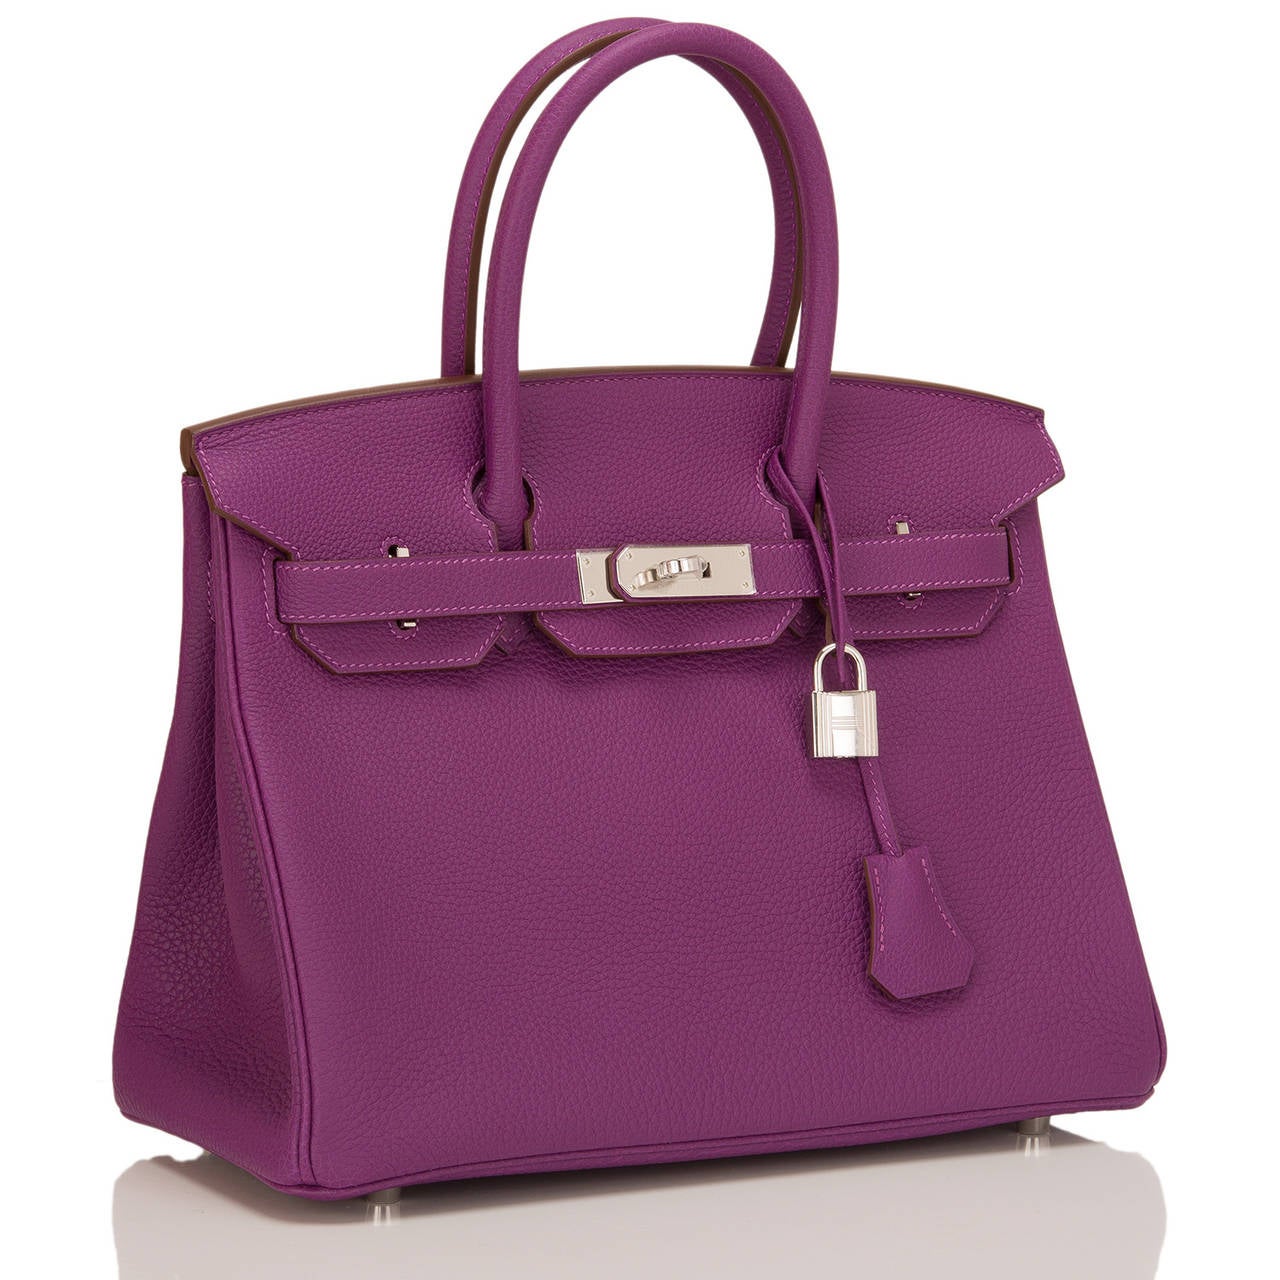 Hermes Anemone Birkin 30cm in togo (bull) leather with palladium hardware.

The Hermes Birkin is the most coveted and the hardest to acquire handbag in the world. Immediately recognizable by its shape, its thin straps with metal plates on the end